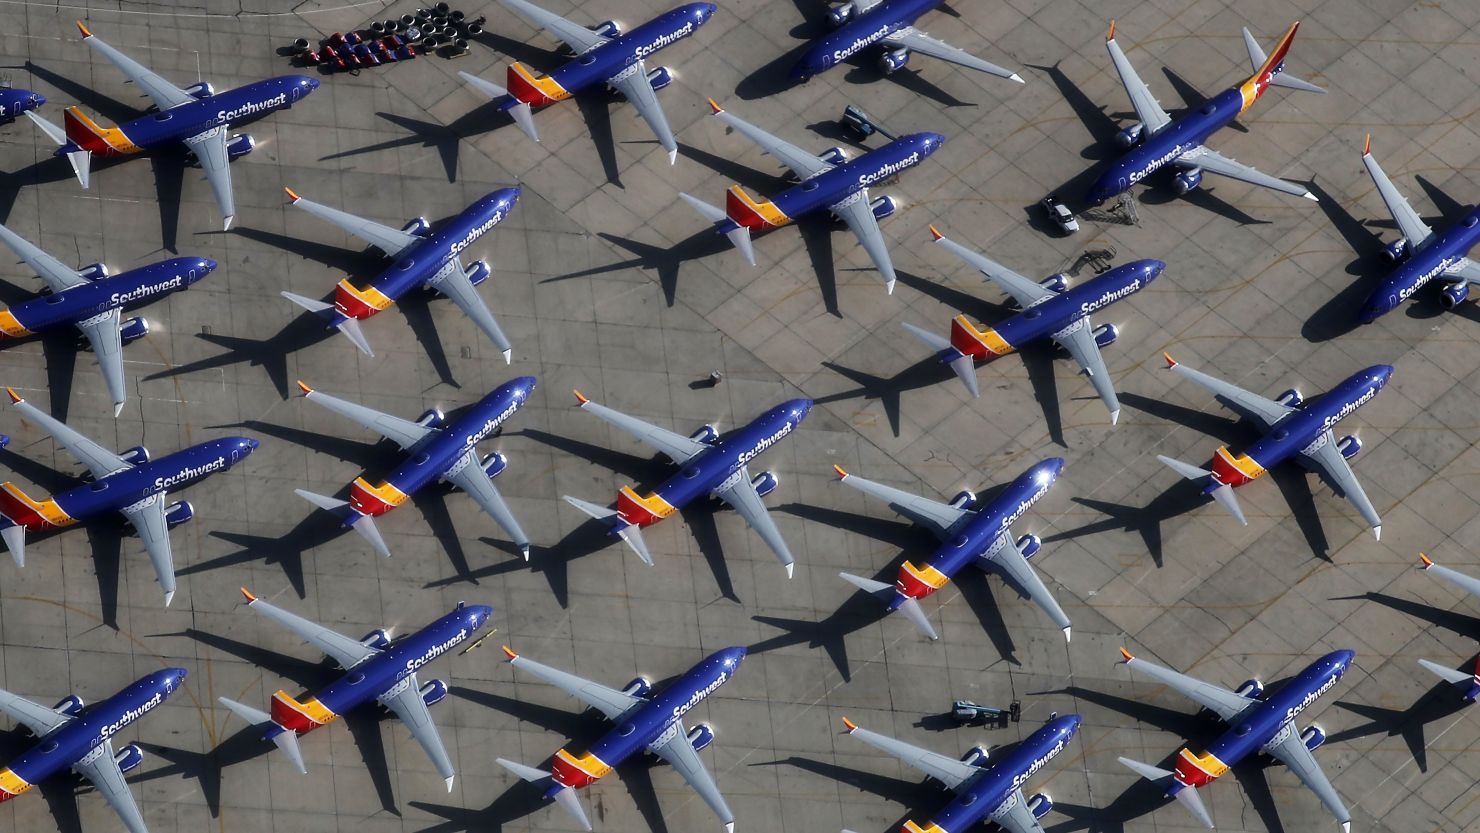 A number of Southwest Airlines Boeing 737 MAX aircraft are parked at Southern California Logistics Airport on March 27, 2019 in Victorville, California. Southwest Airlines is waiting out a global grounding of MAX 8 and MAX 9 aircraft at the airport.  (Photo by Mario Tama/Getty Images)